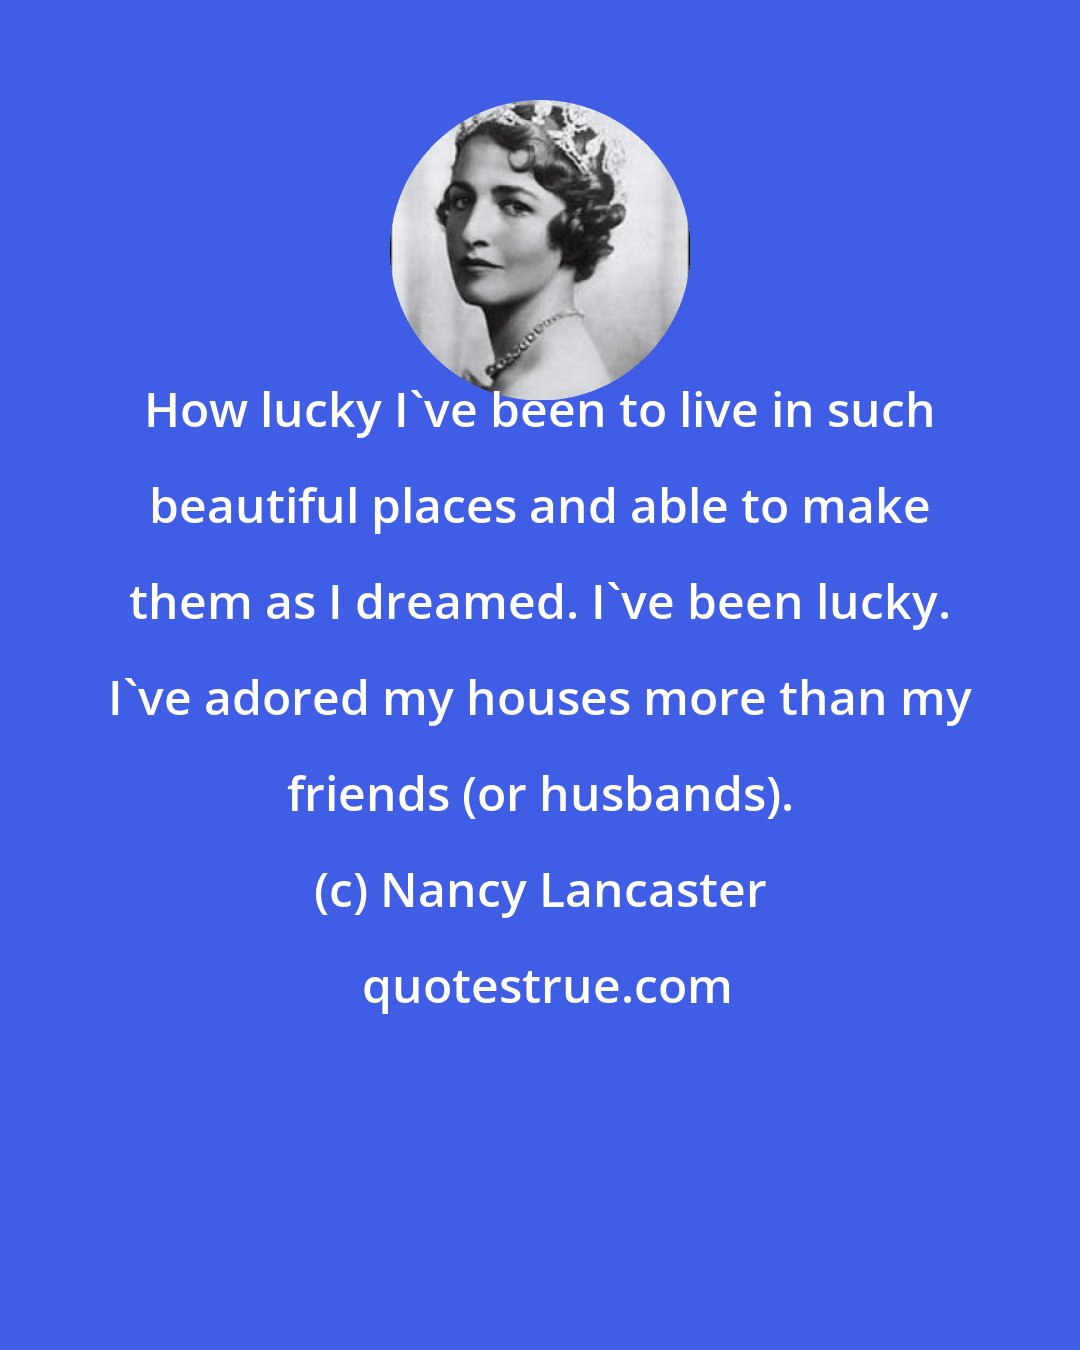 Nancy Lancaster: How lucky I've been to live in such beautiful places and able to make them as I dreamed. I've been lucky. I've adored my houses more than my friends (or husbands).